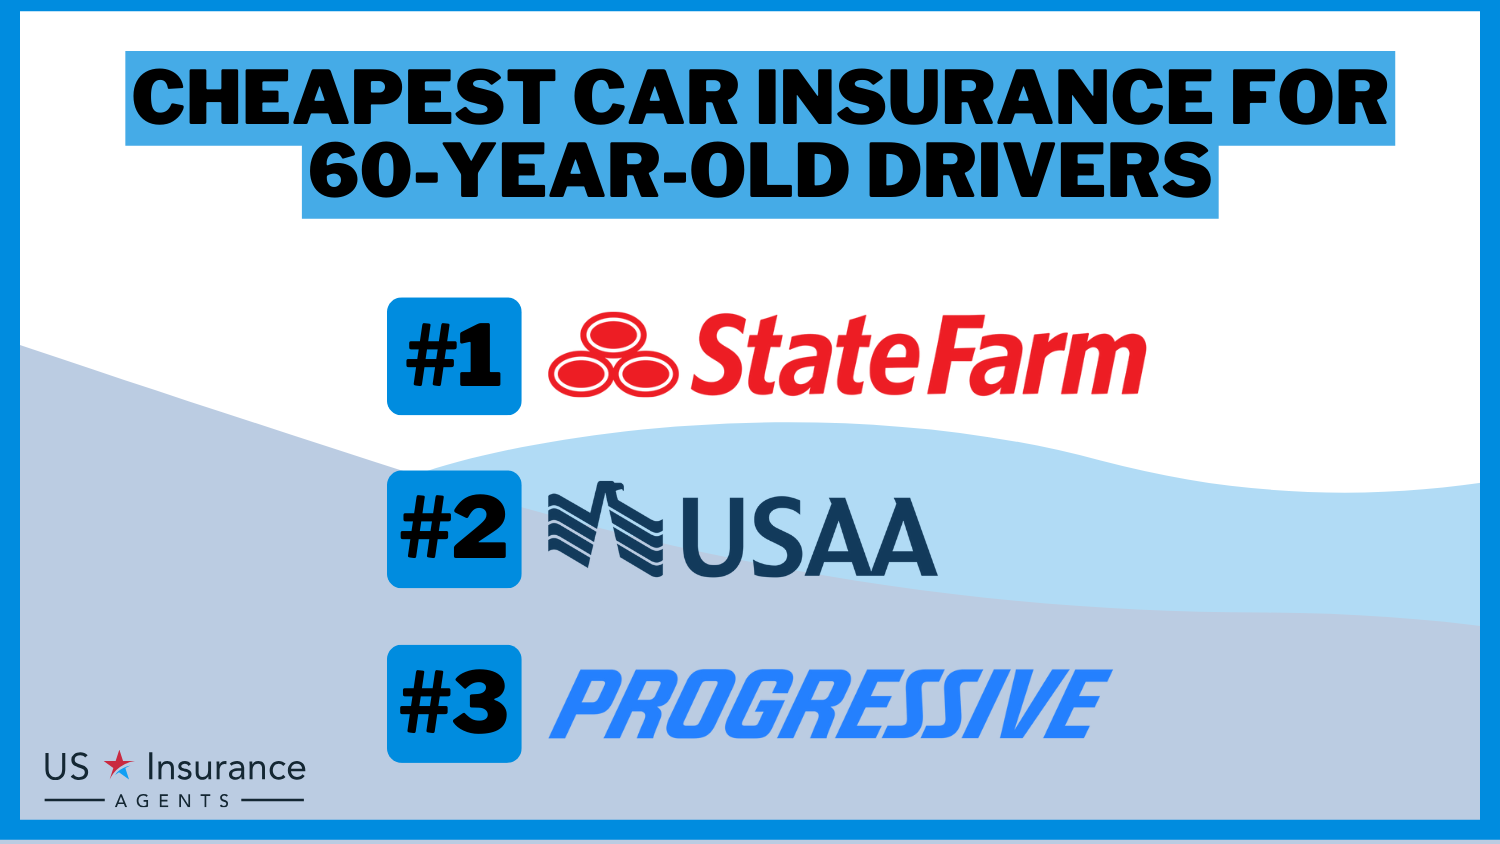 Cheapest Car Insurance for 60-Year-Old Drivers: State Farm, USAA, and Progressive